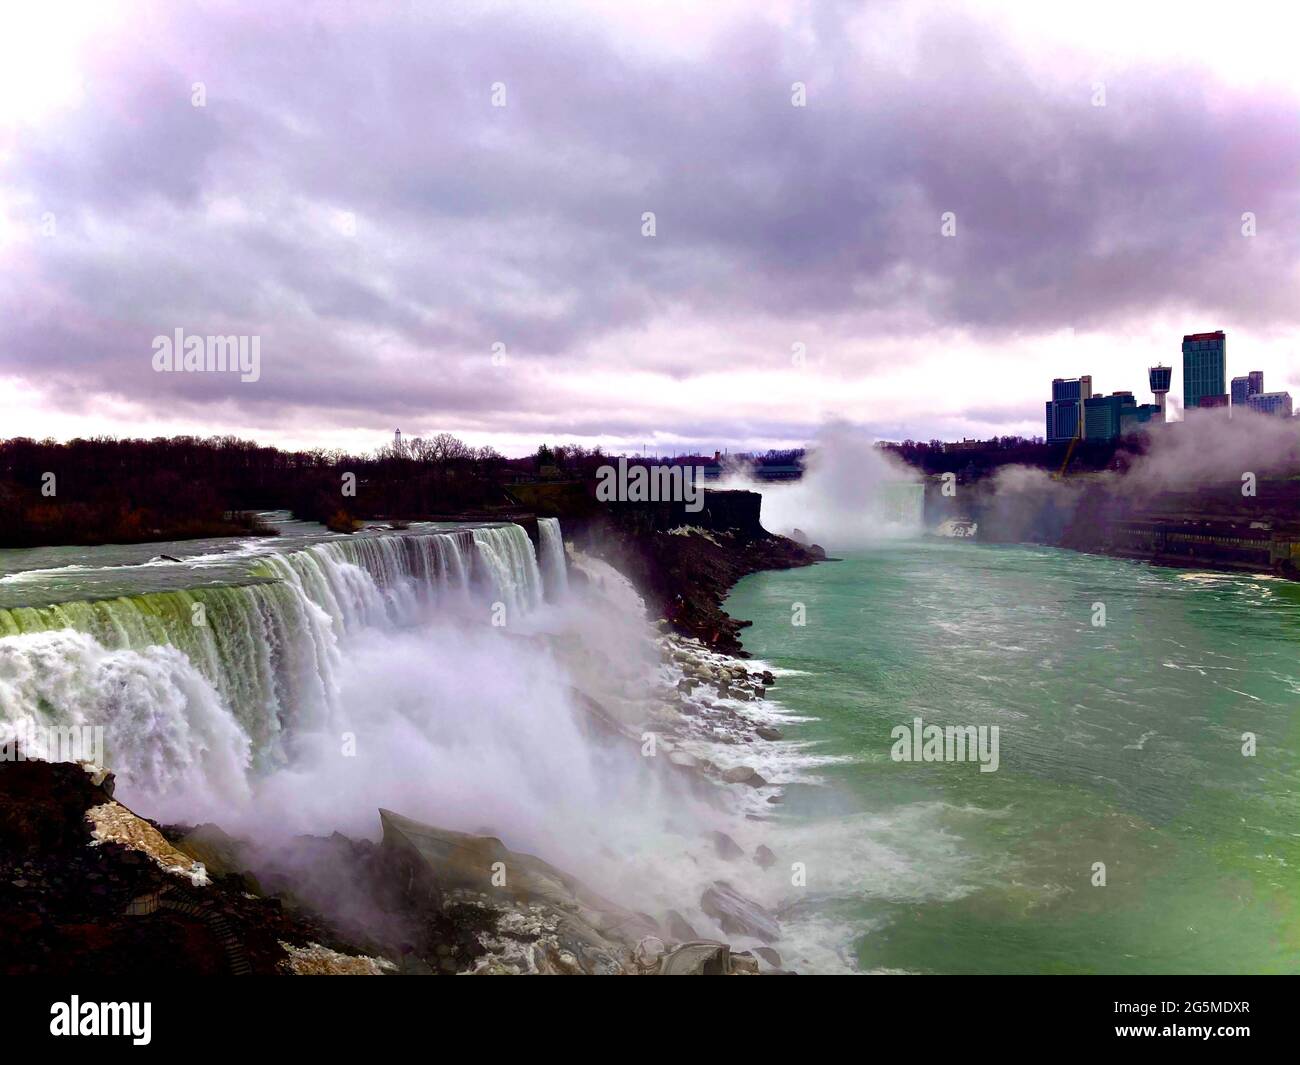 Niagara Falis a group of three waterfalls at the southern end of Niagara Gorge, spanning the border between the province of Ontario in Canada Stock Photo